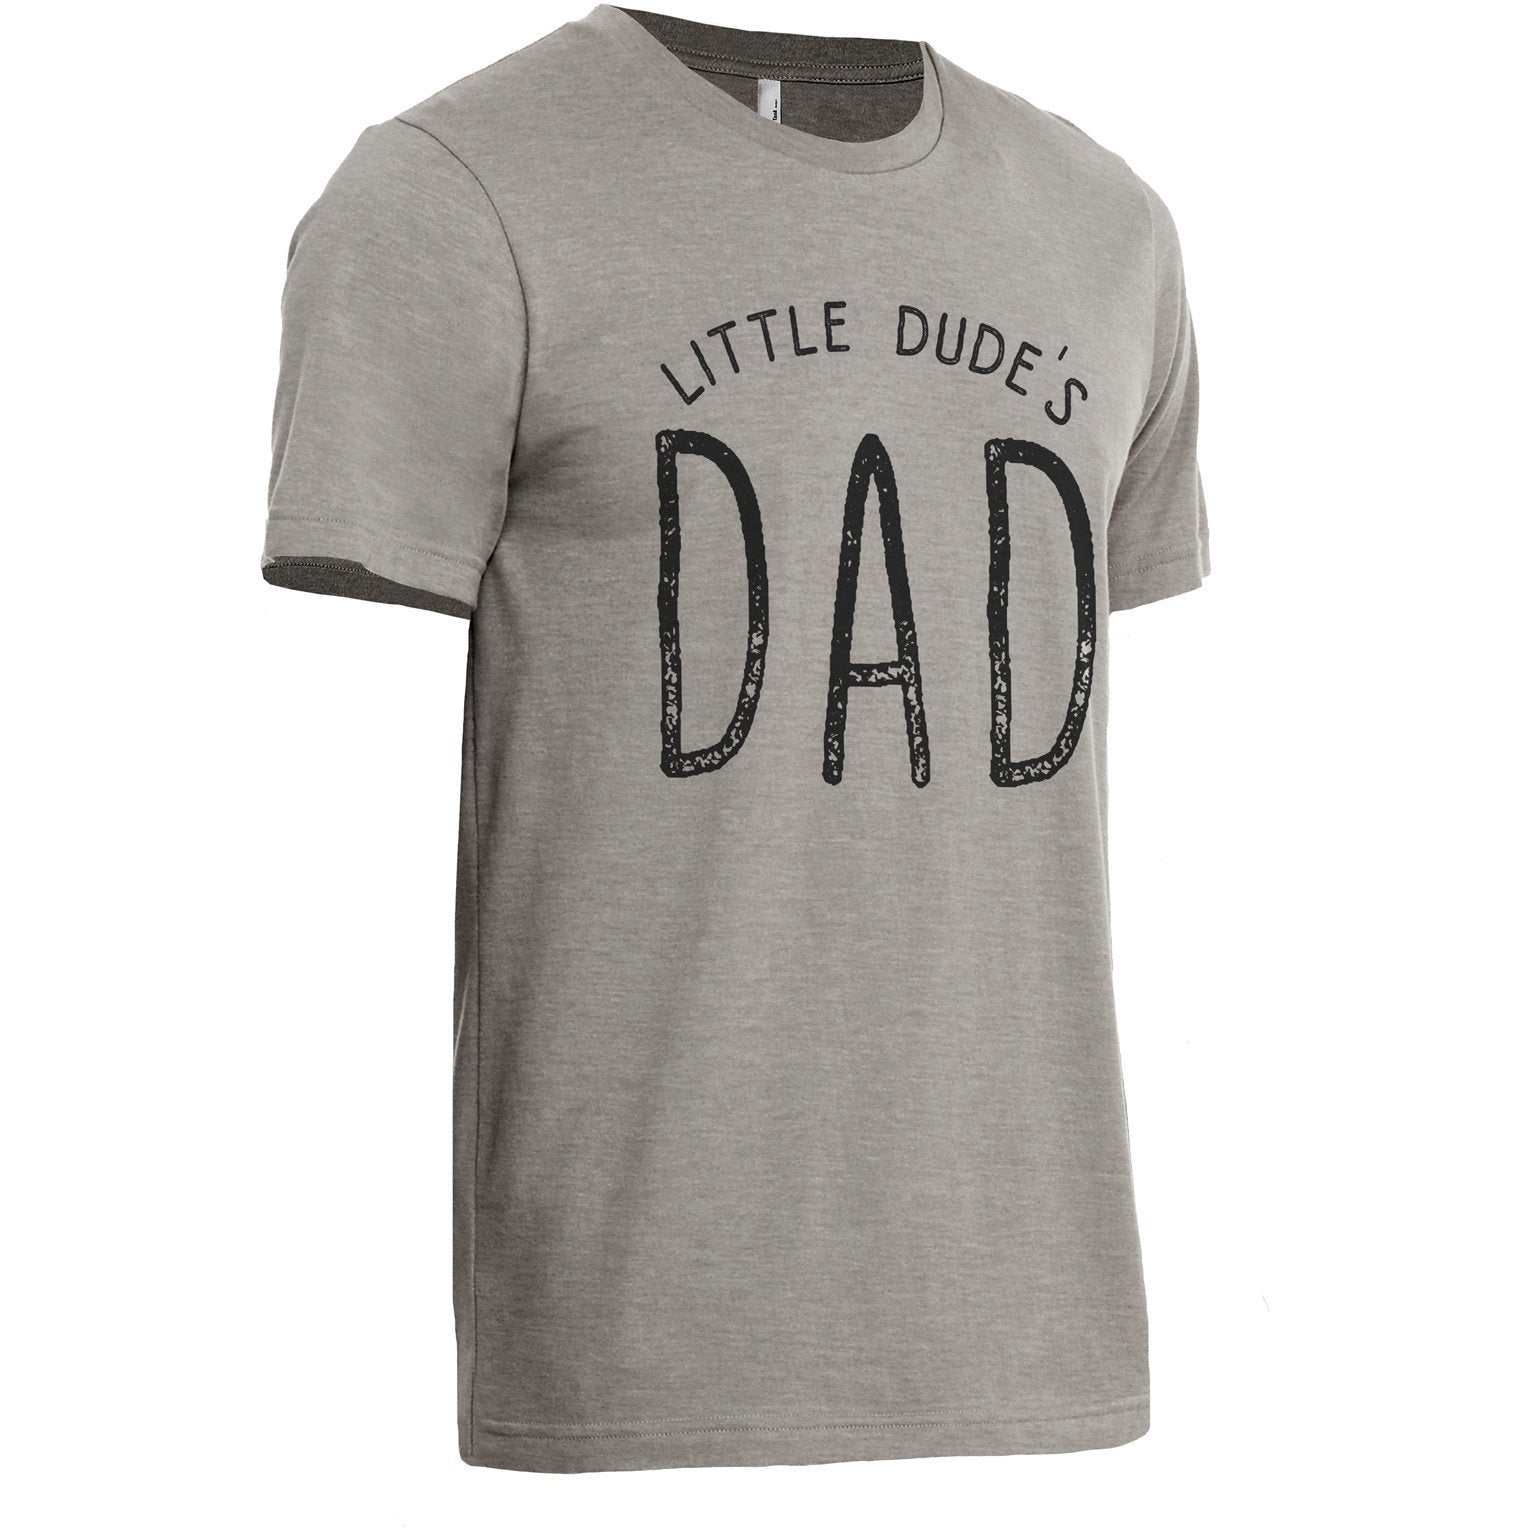 Lil Dude's Dad Military Grey Printed Graphic Men's Crew T-Shirt Tee Side View